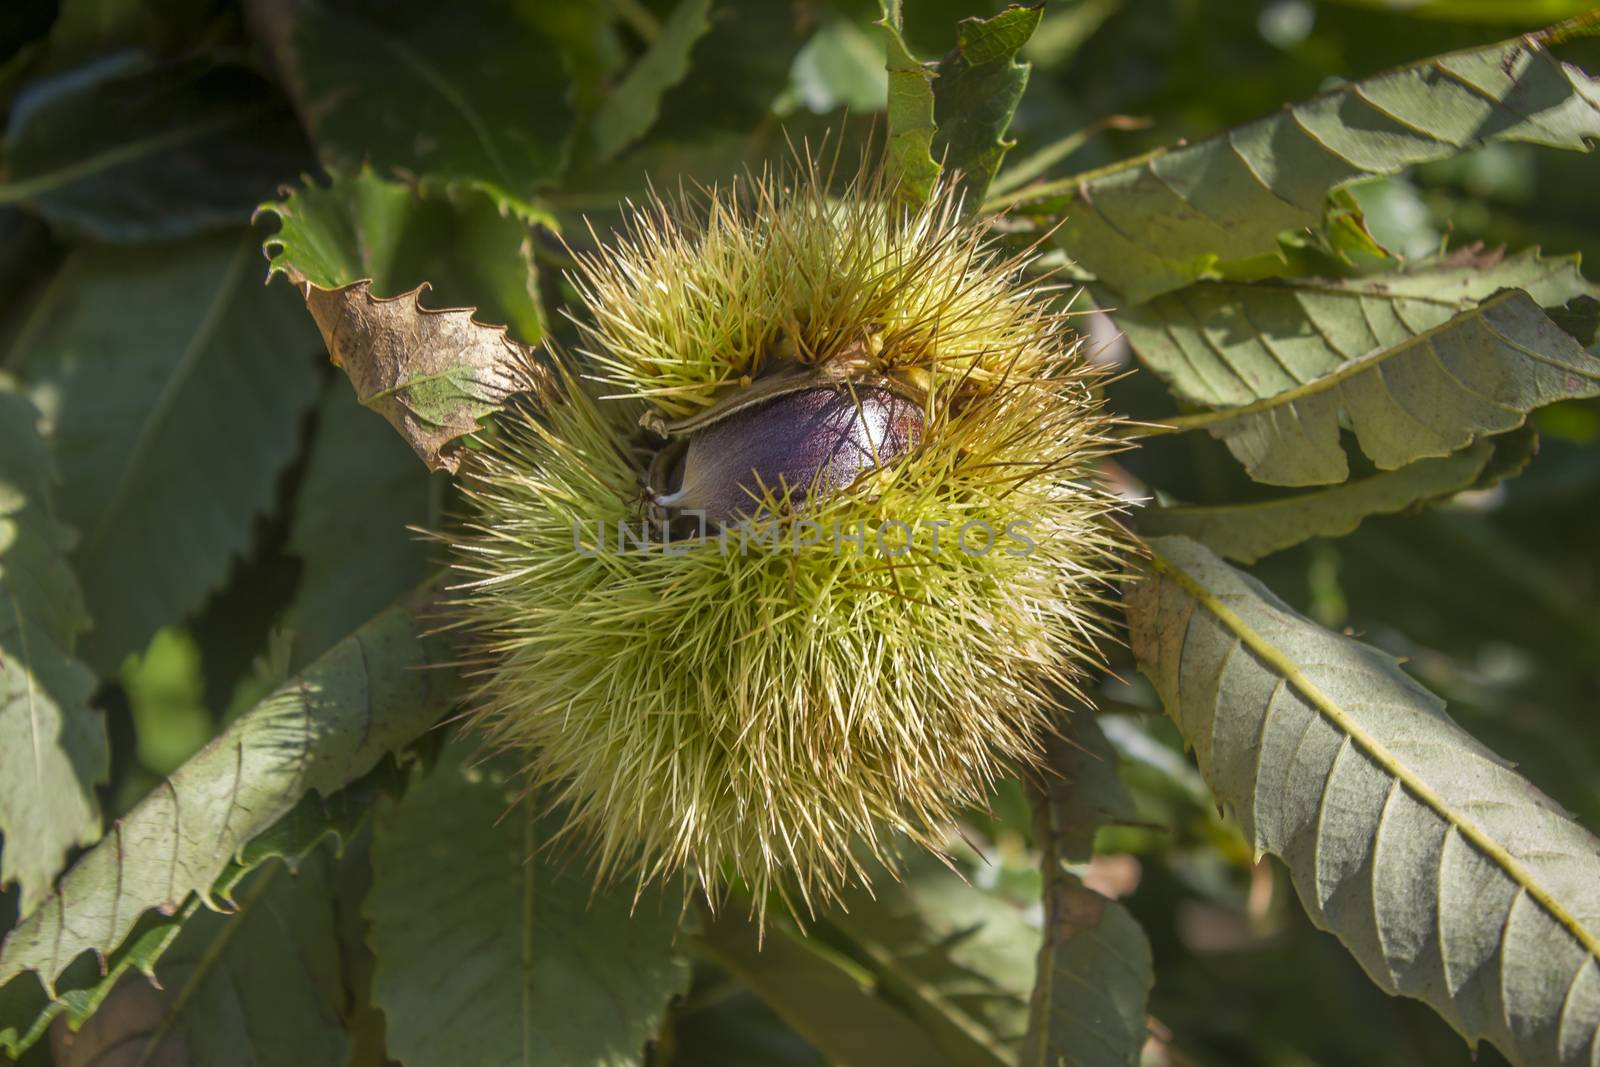 chestnut fruit in the tree with green leaves